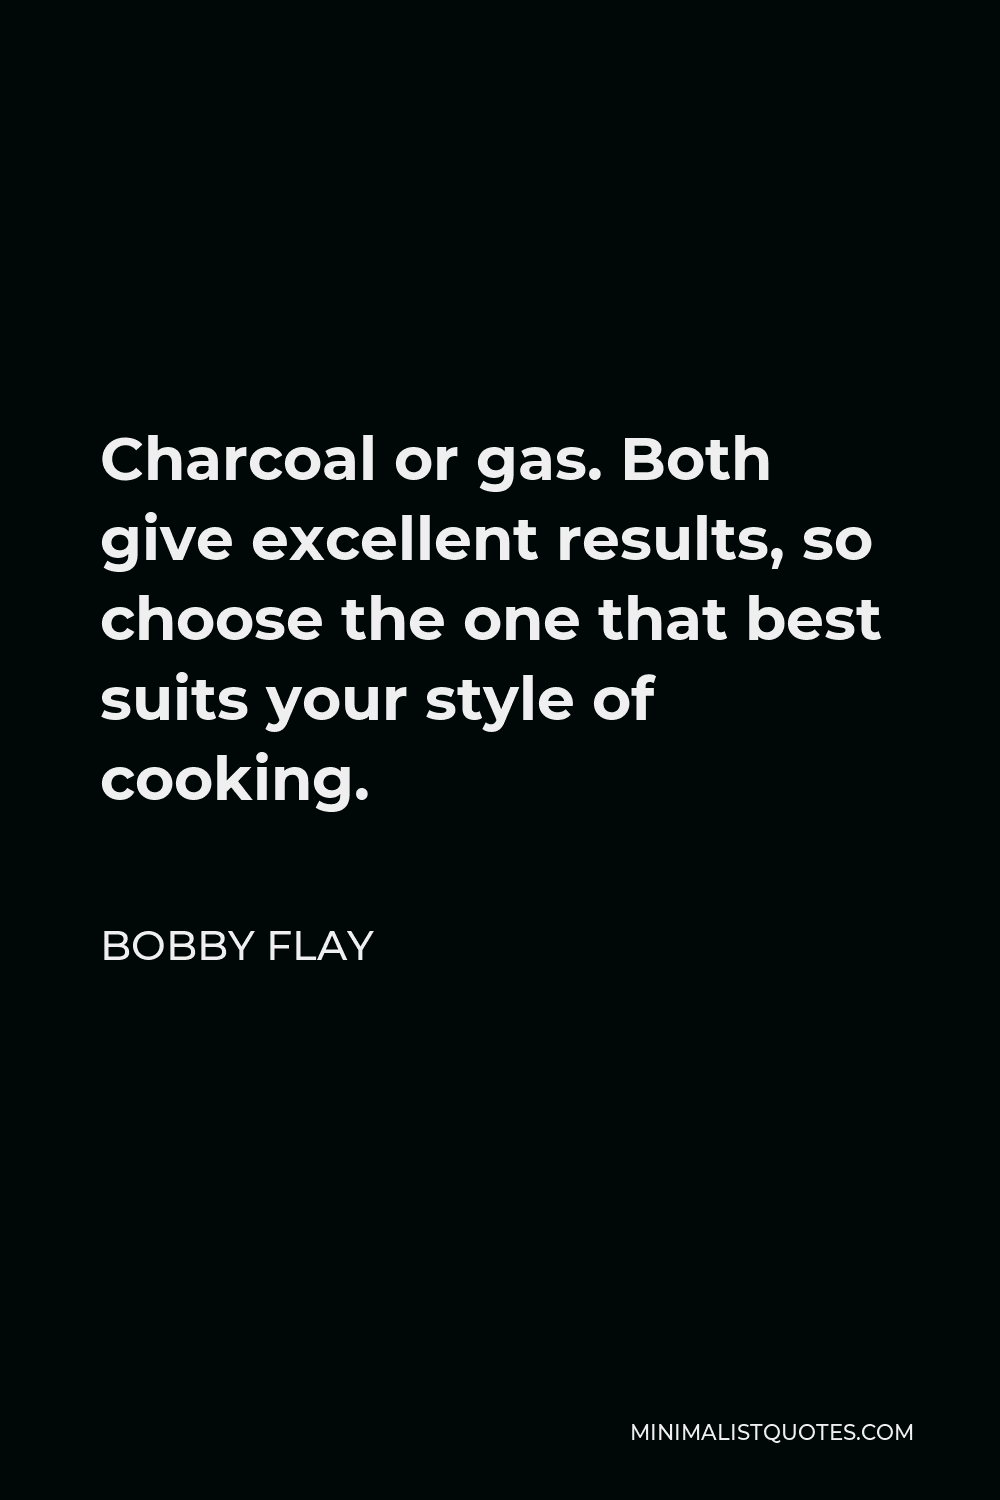 Bobby Flay Quote - Charcoal or gas. Both give excellent results, so choose the one that best suits your style of cooking.